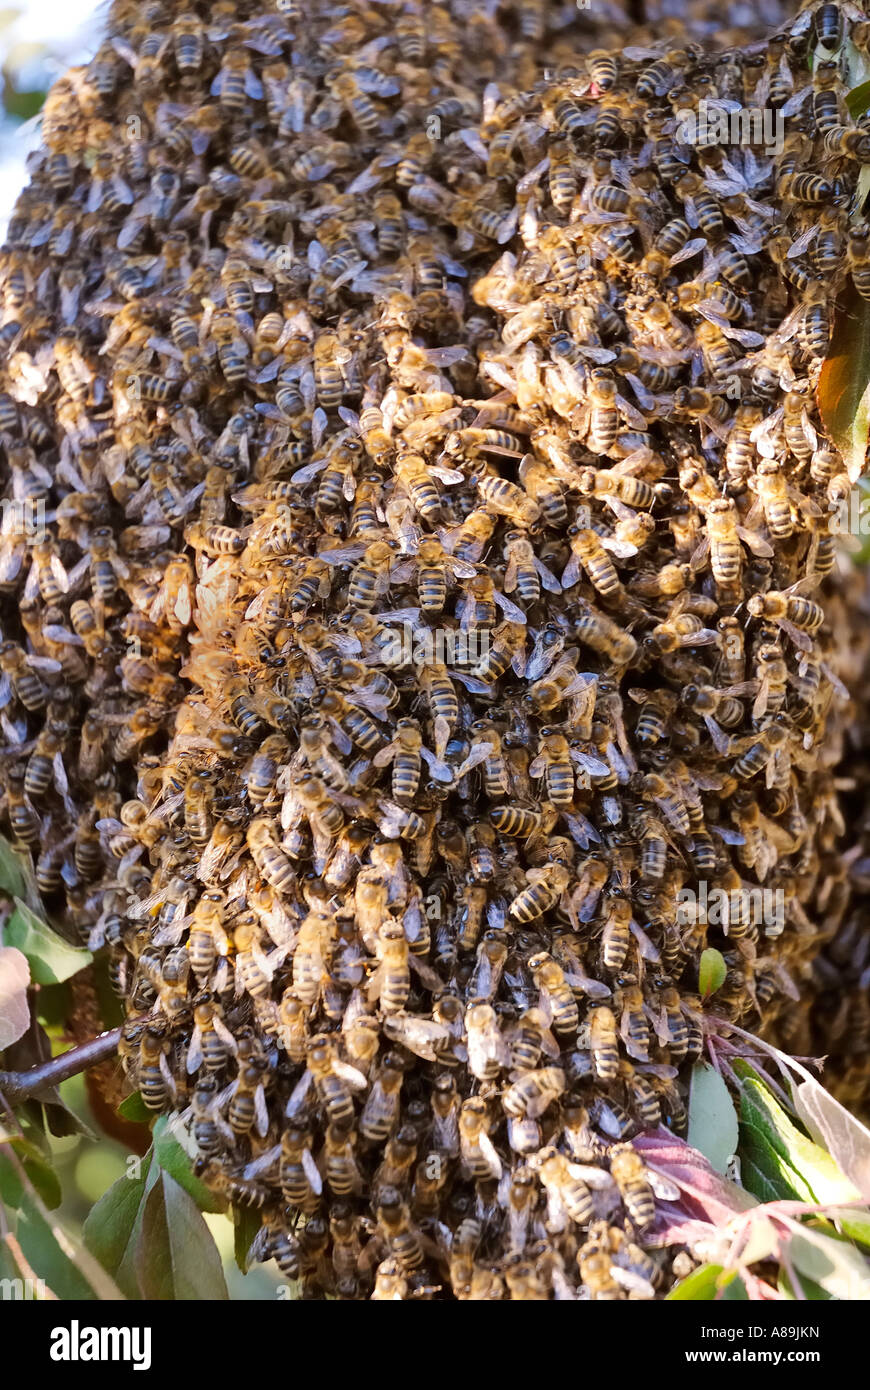 Bee swarm has settled on the branch of hybrid apple tree Stock Photo